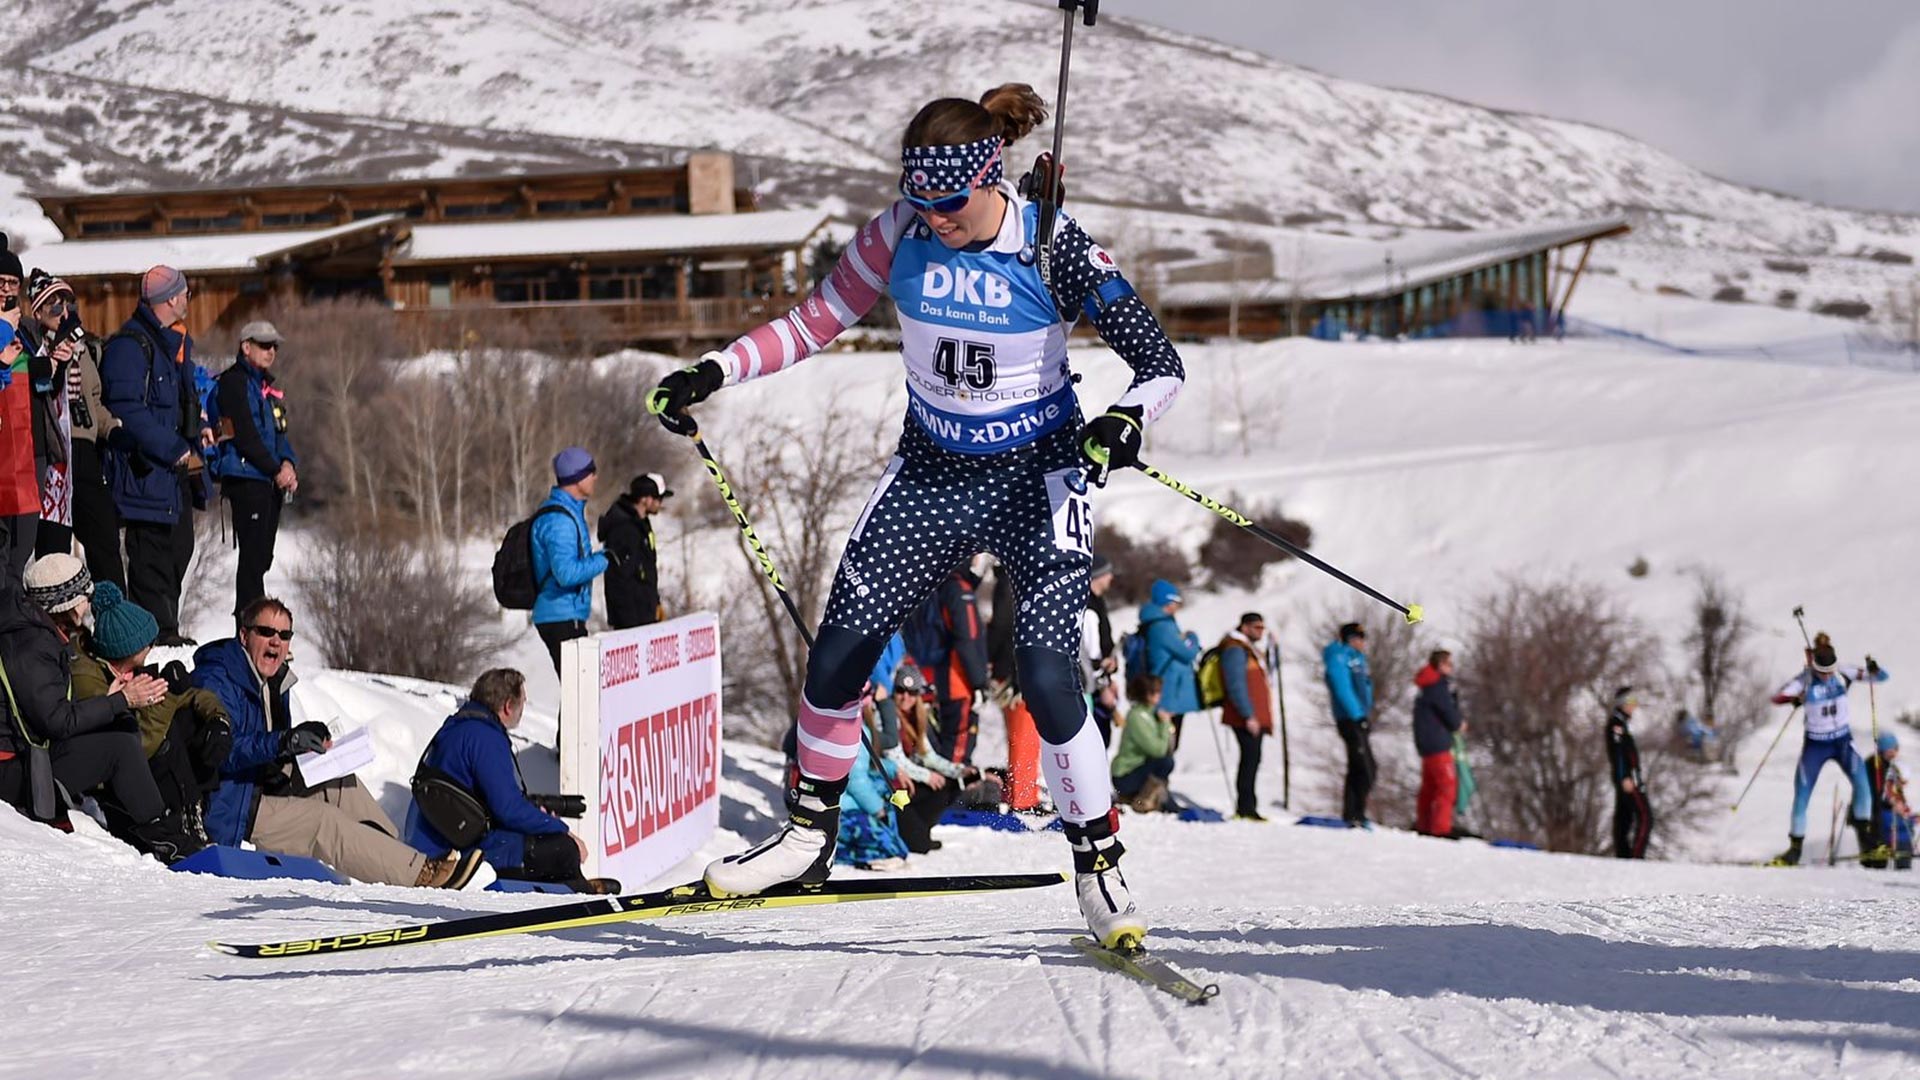 A biathlete navigates the terrain at the Soldier Hollow Nordic Center in Midway, Utah (Utah Olympic Legacy Foundation)